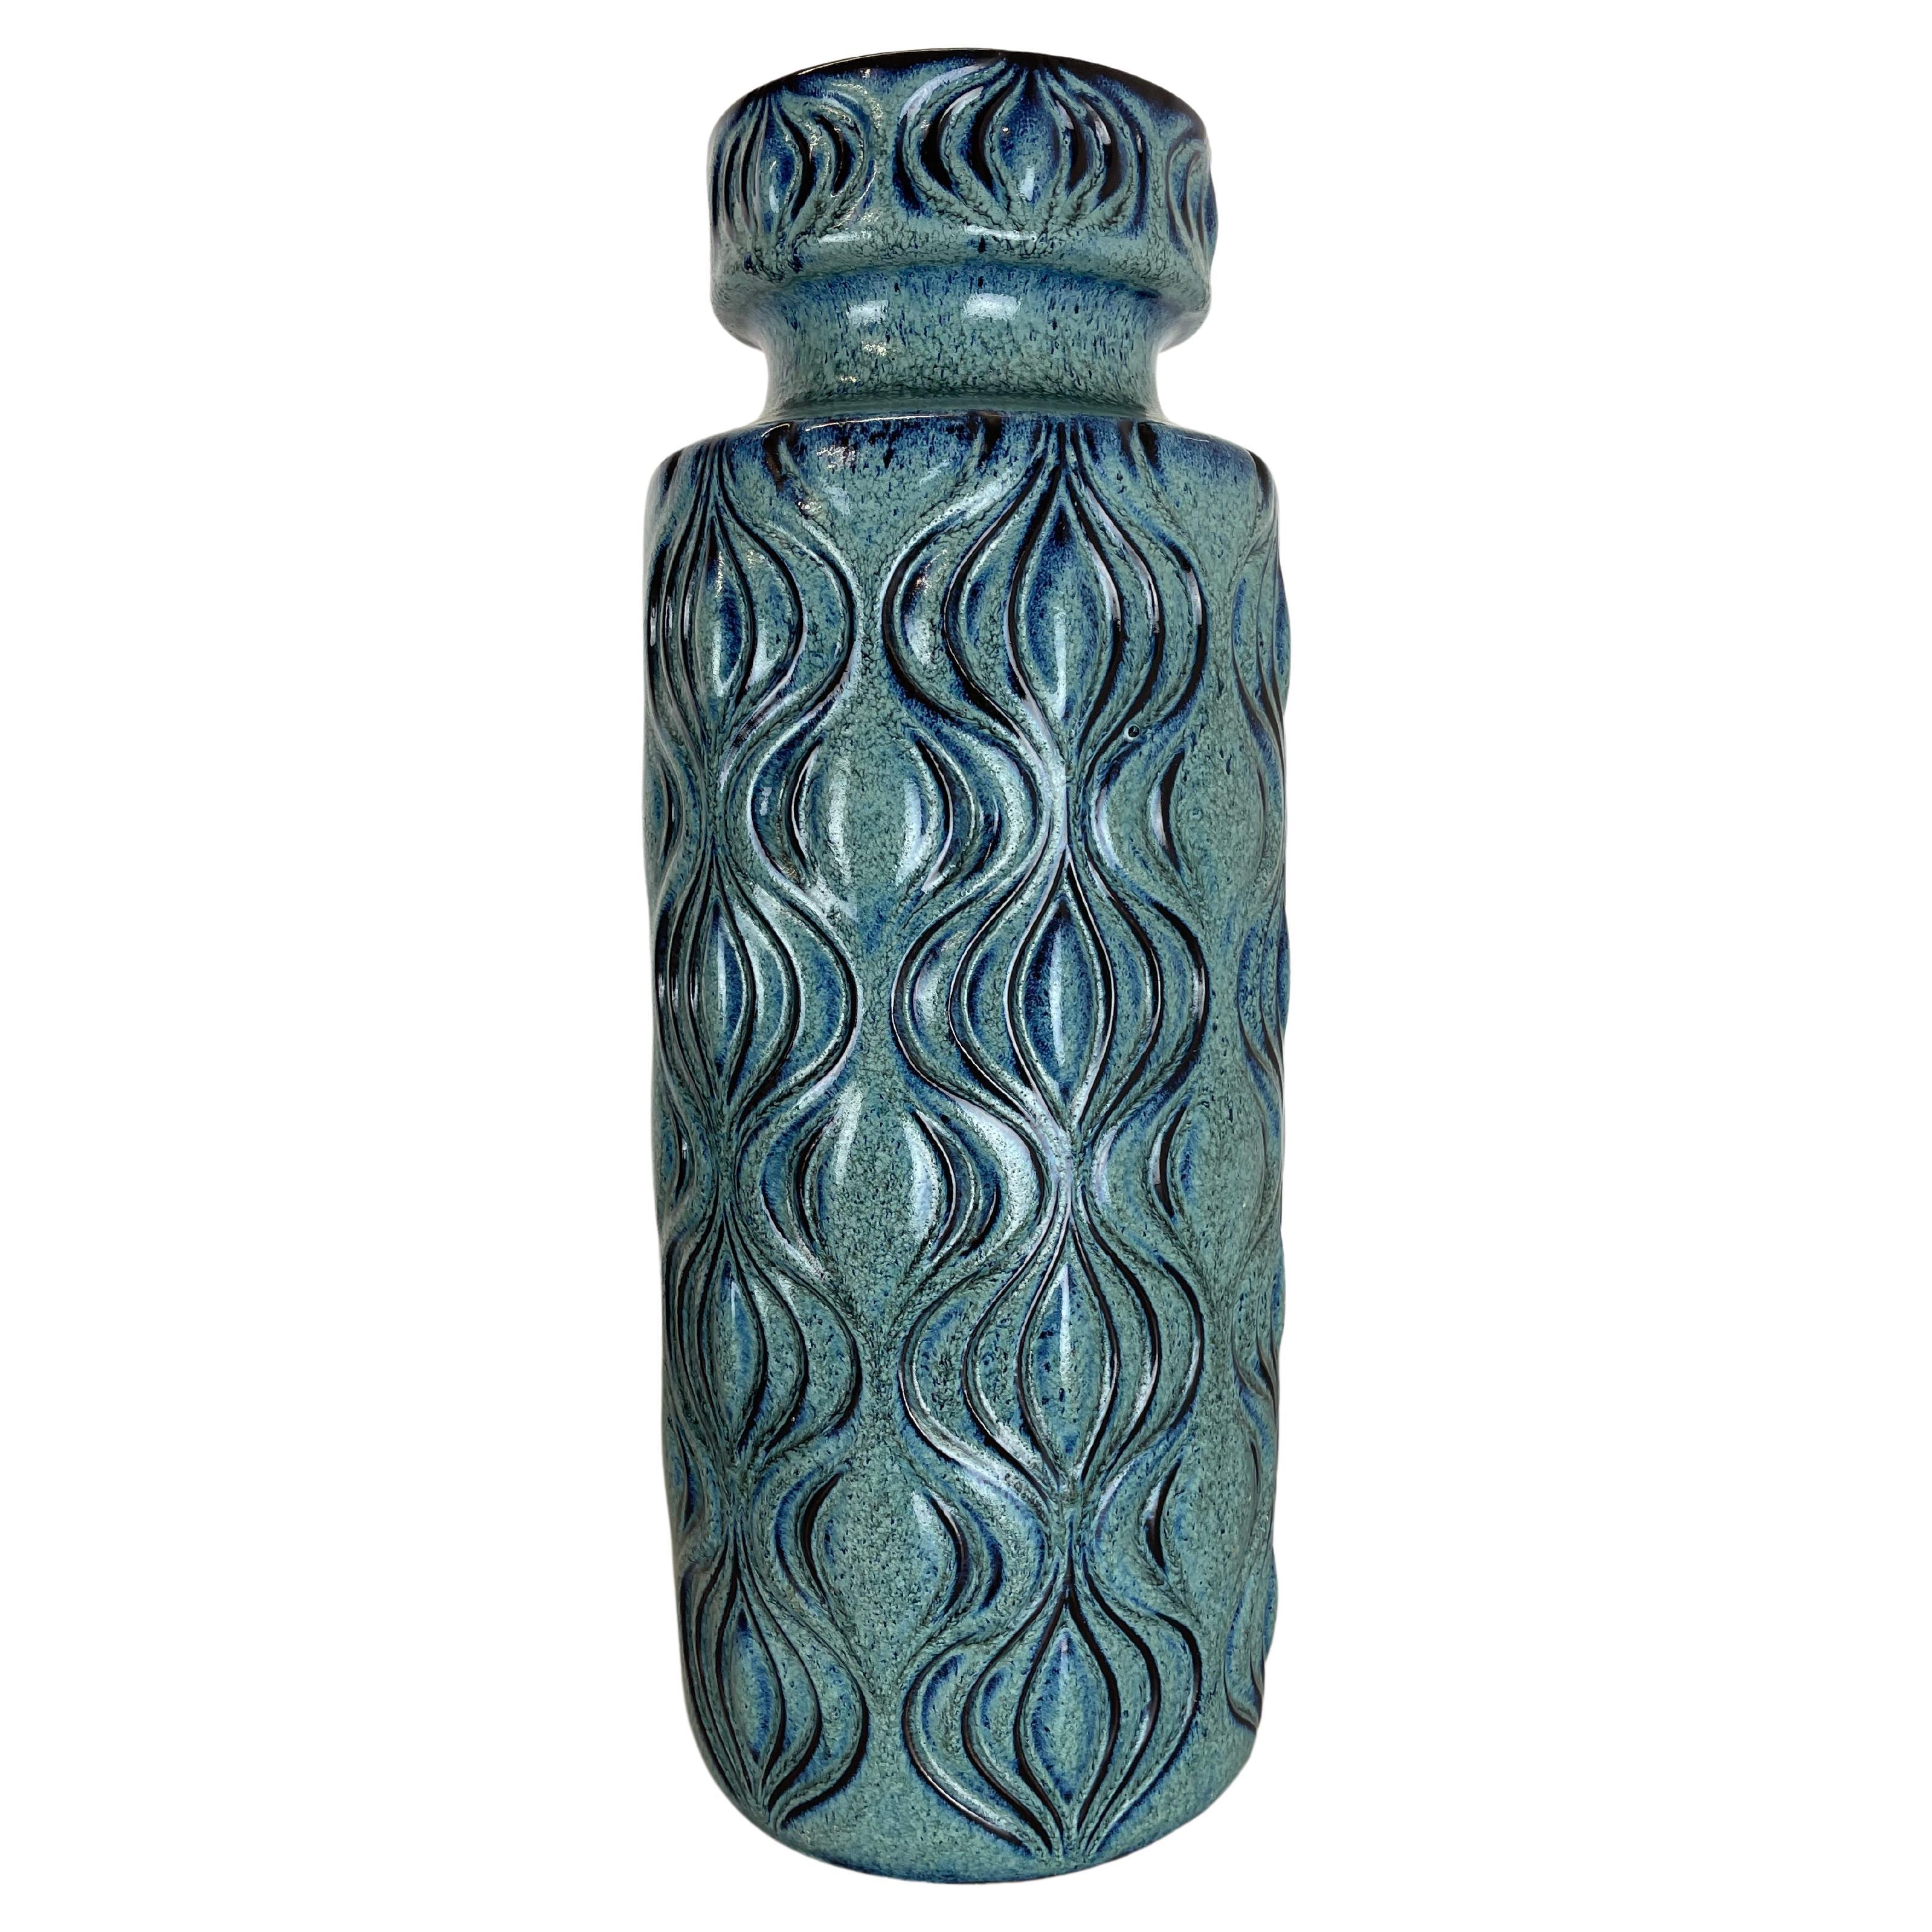 Rare 54cm "Turquoise" Vase Fat Lava "Onion" Vase by Scheurich, Germany, 1970s For Sale